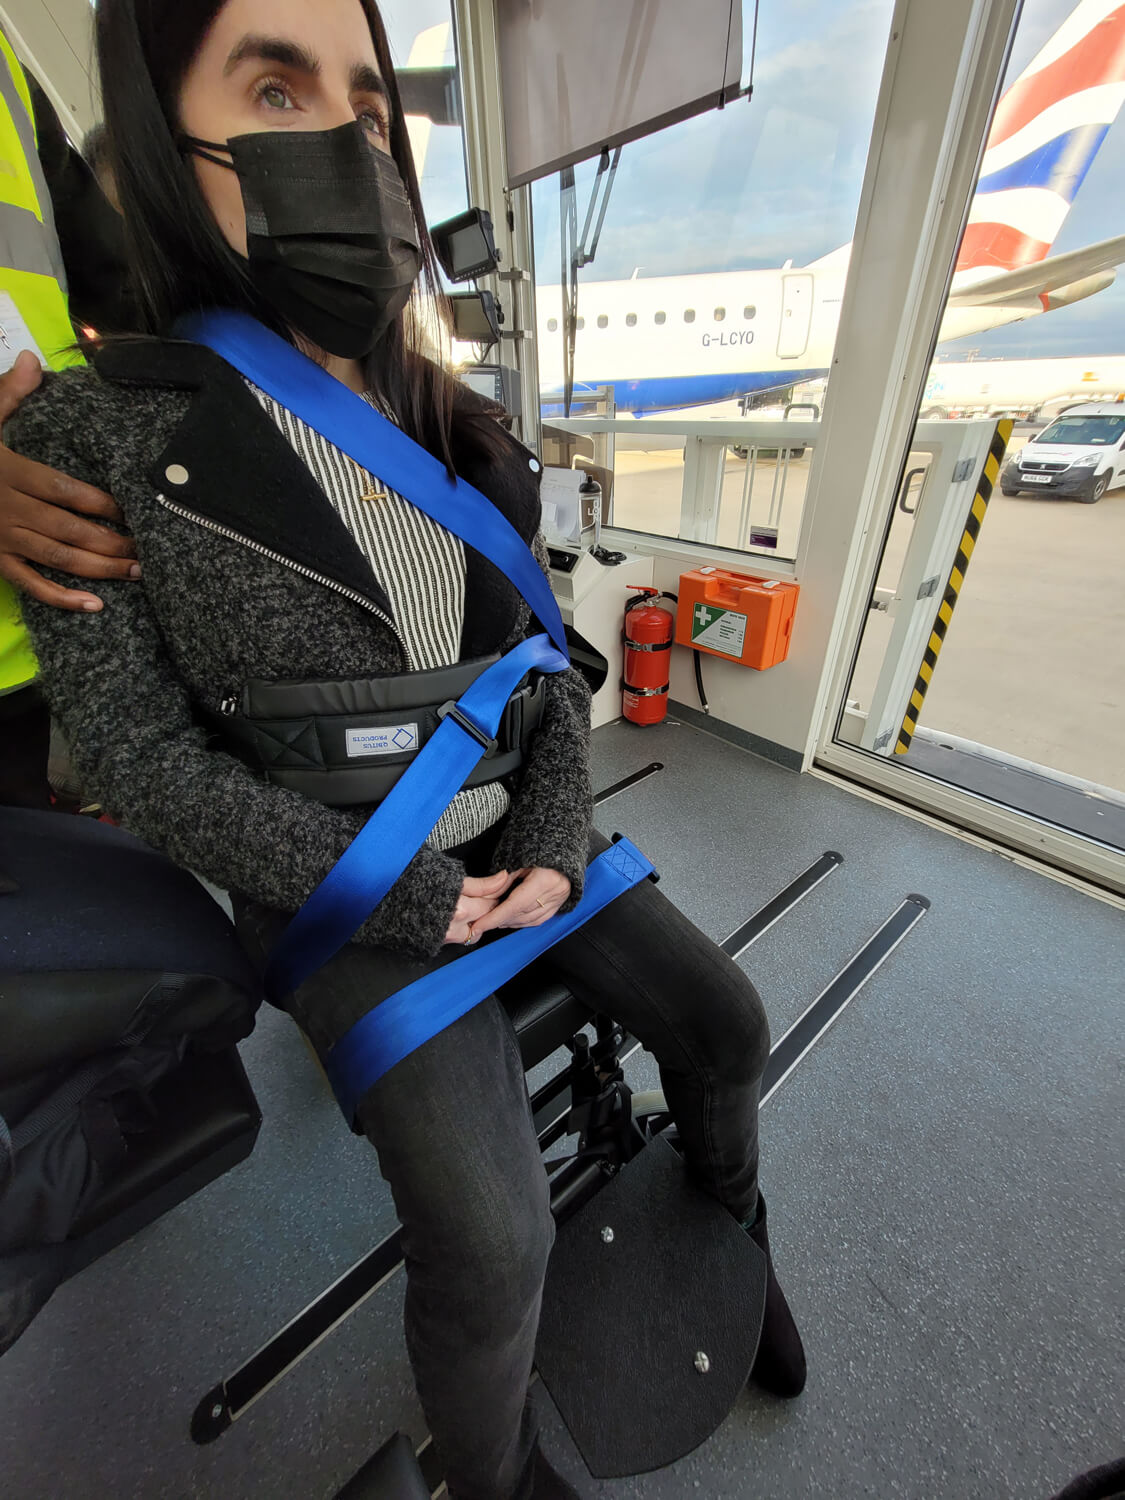 Emma strapped into an airport aisle chair inside the ambulift. The British Airways flag on the plane tail can be seen through the ambulift window. Emma is looking solemly straight ahead. Her feet are dangling at the side of the footplate.